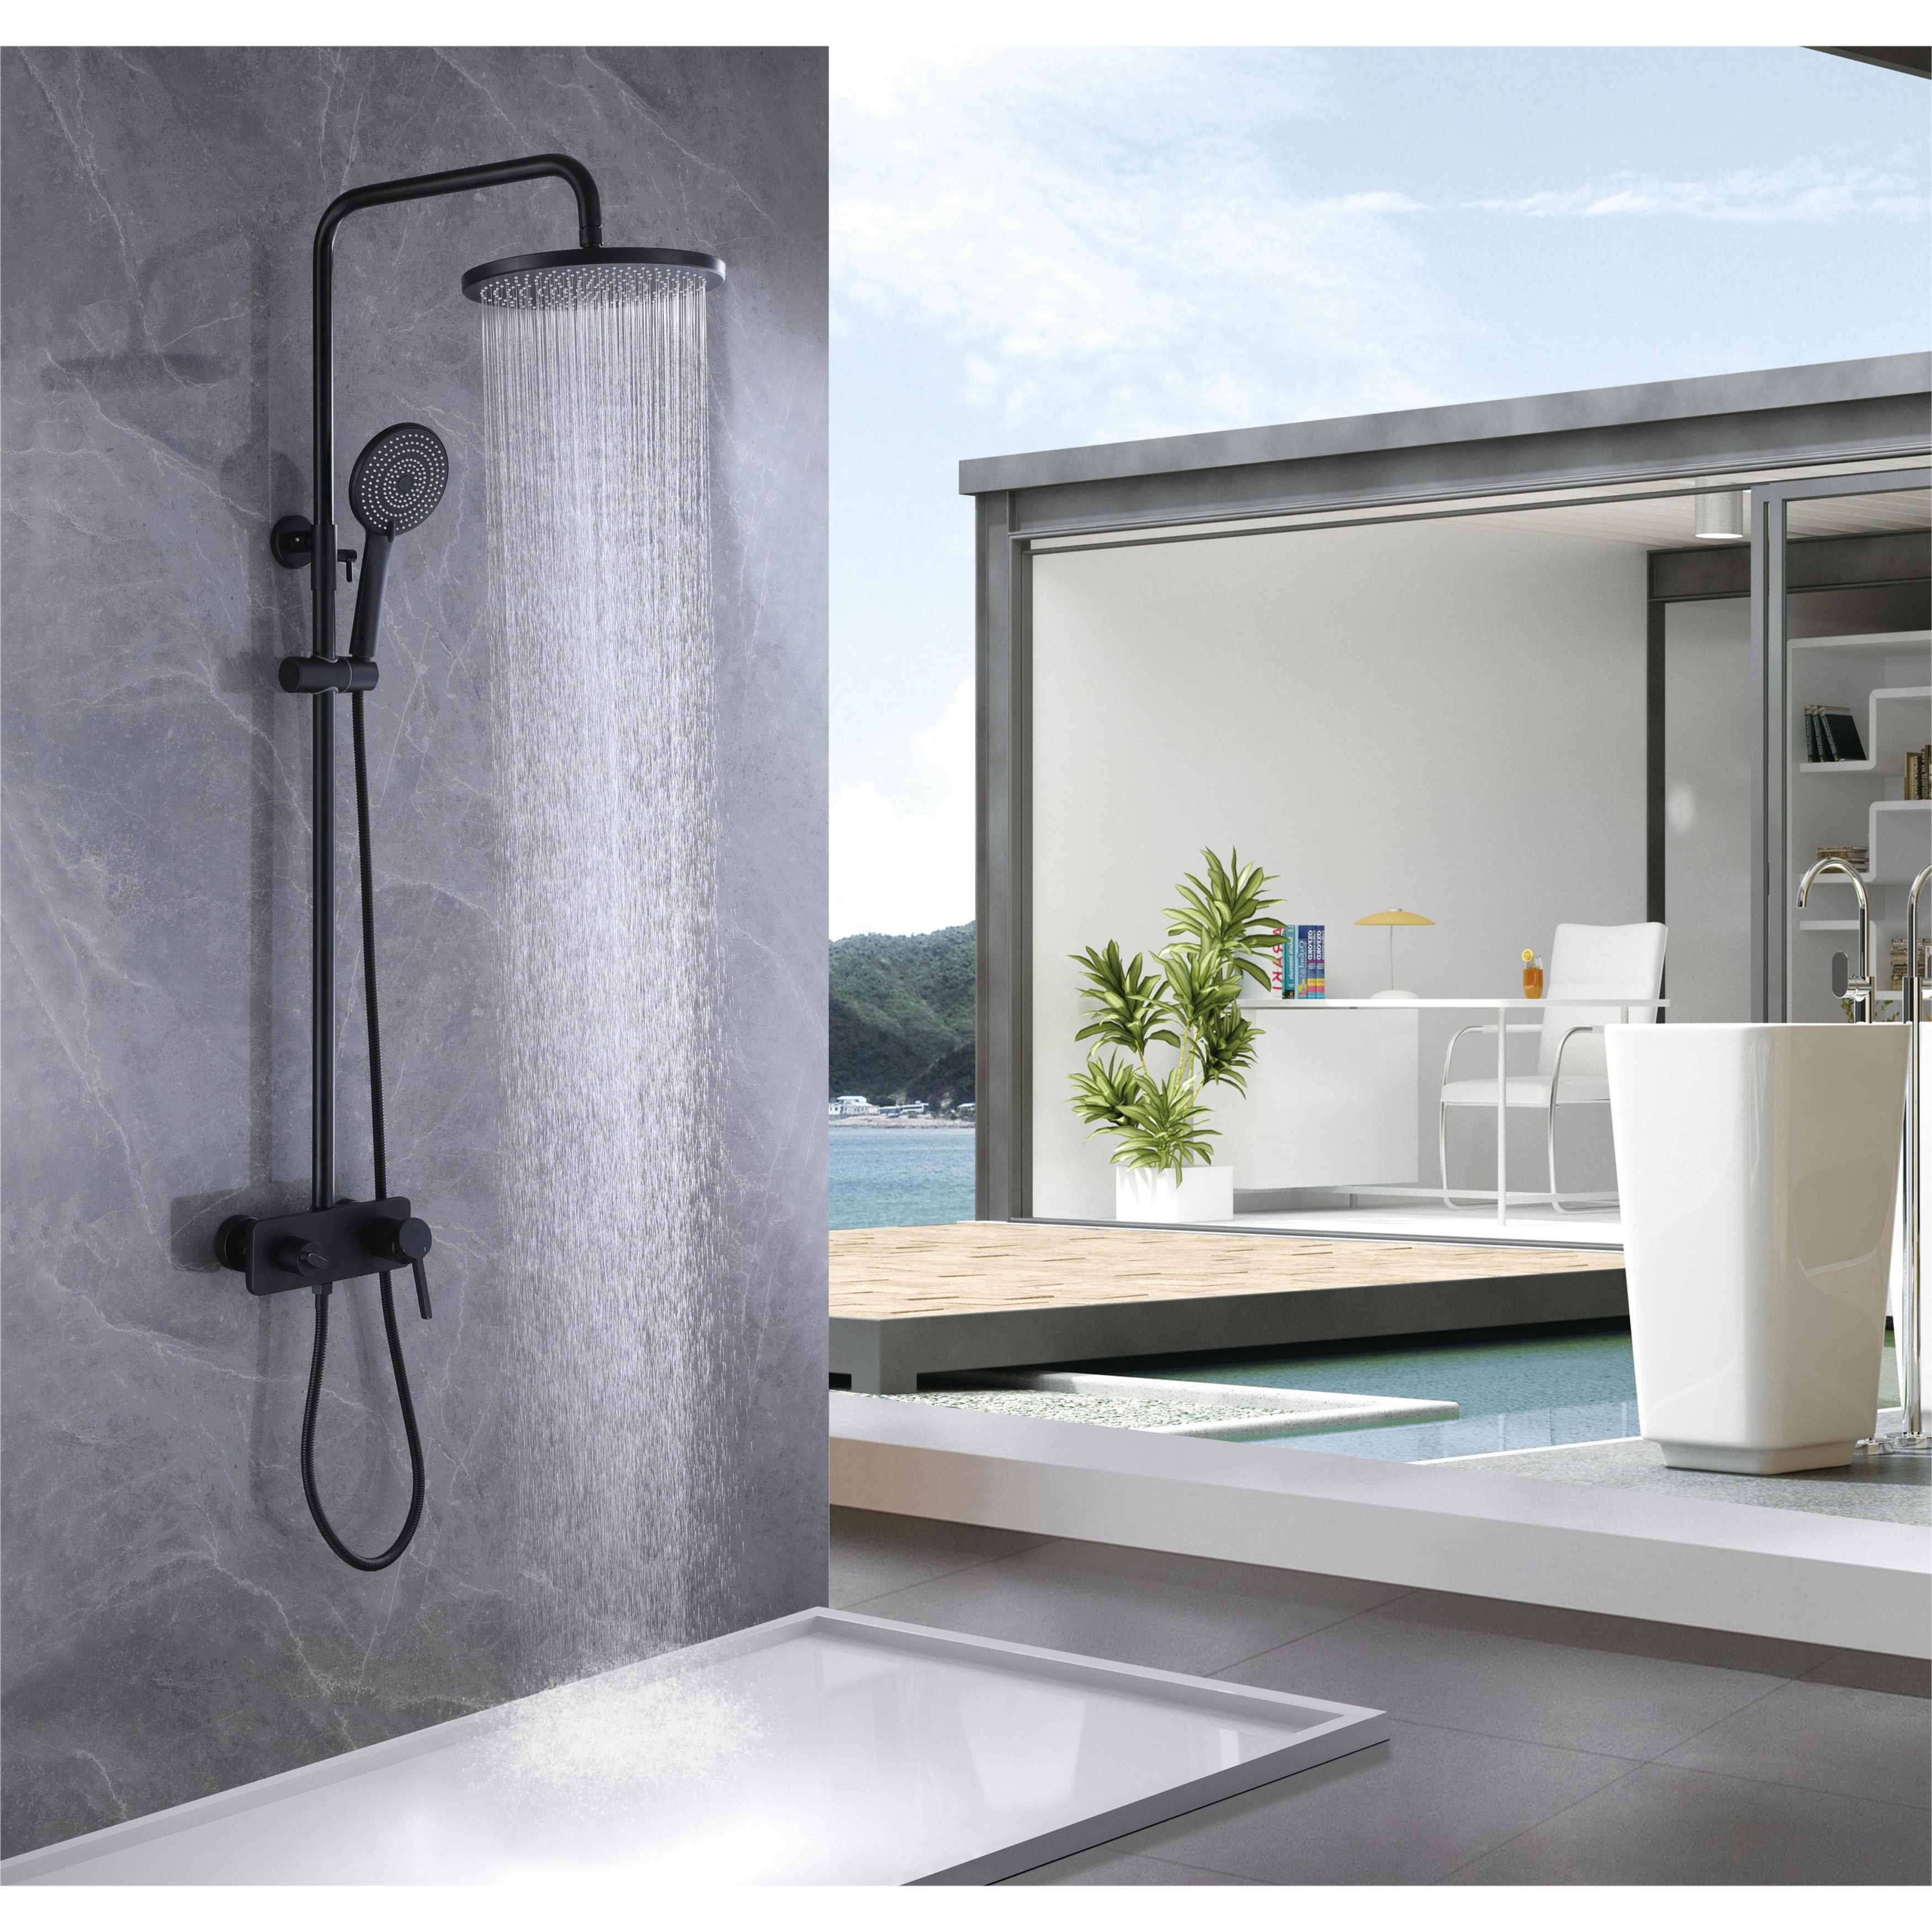 https://ak1.ostkcdn.com/images/products/is/images/direct/a778fd07b4b24329f2c0e995d3663d67ee6bbce9/Wall-Mounted-5-Way-Complete-Rain-Shower-System-Black-With-High-pressure-Handheld.jpg